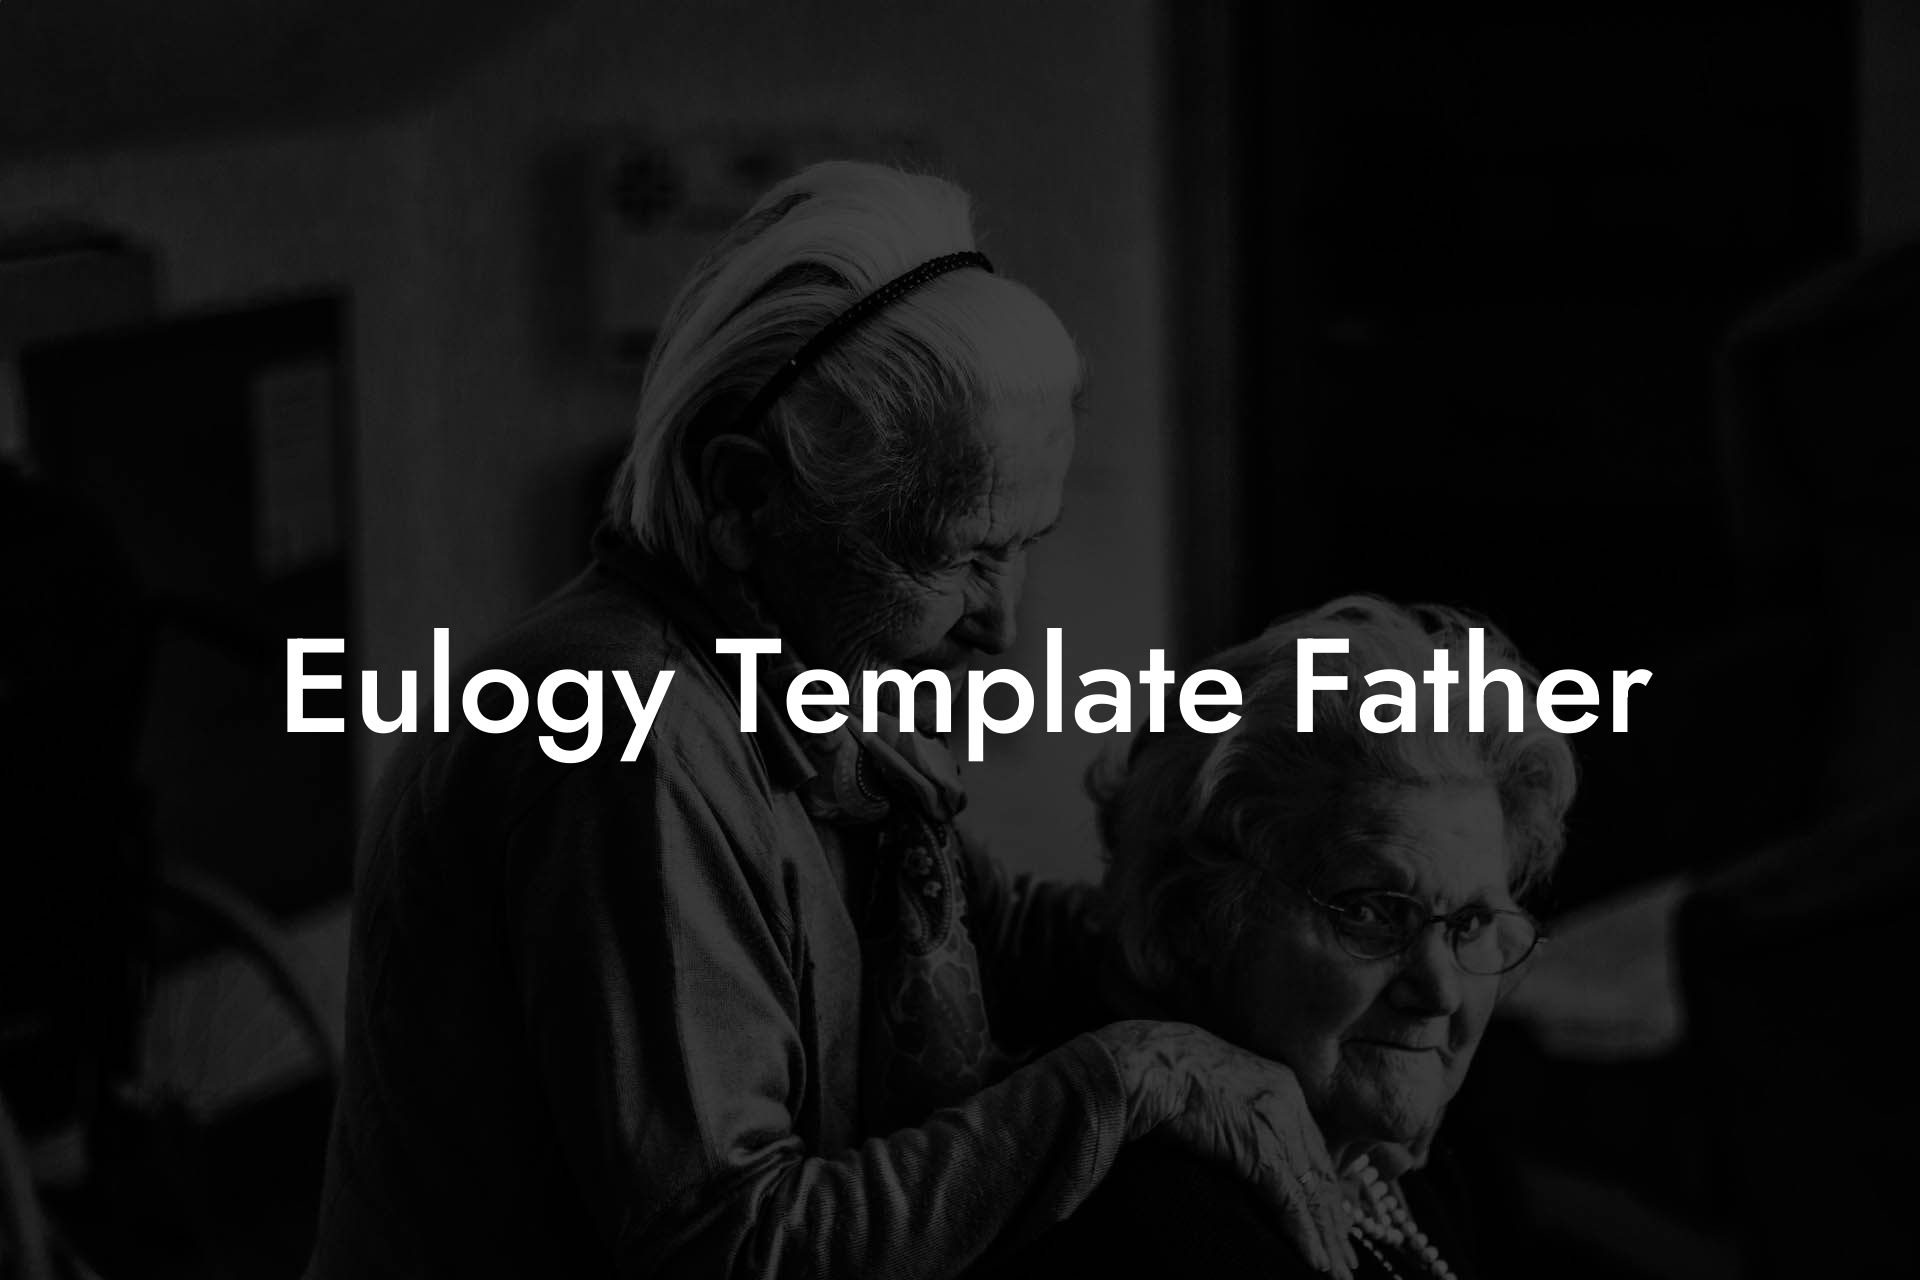 Eulogy Template Father